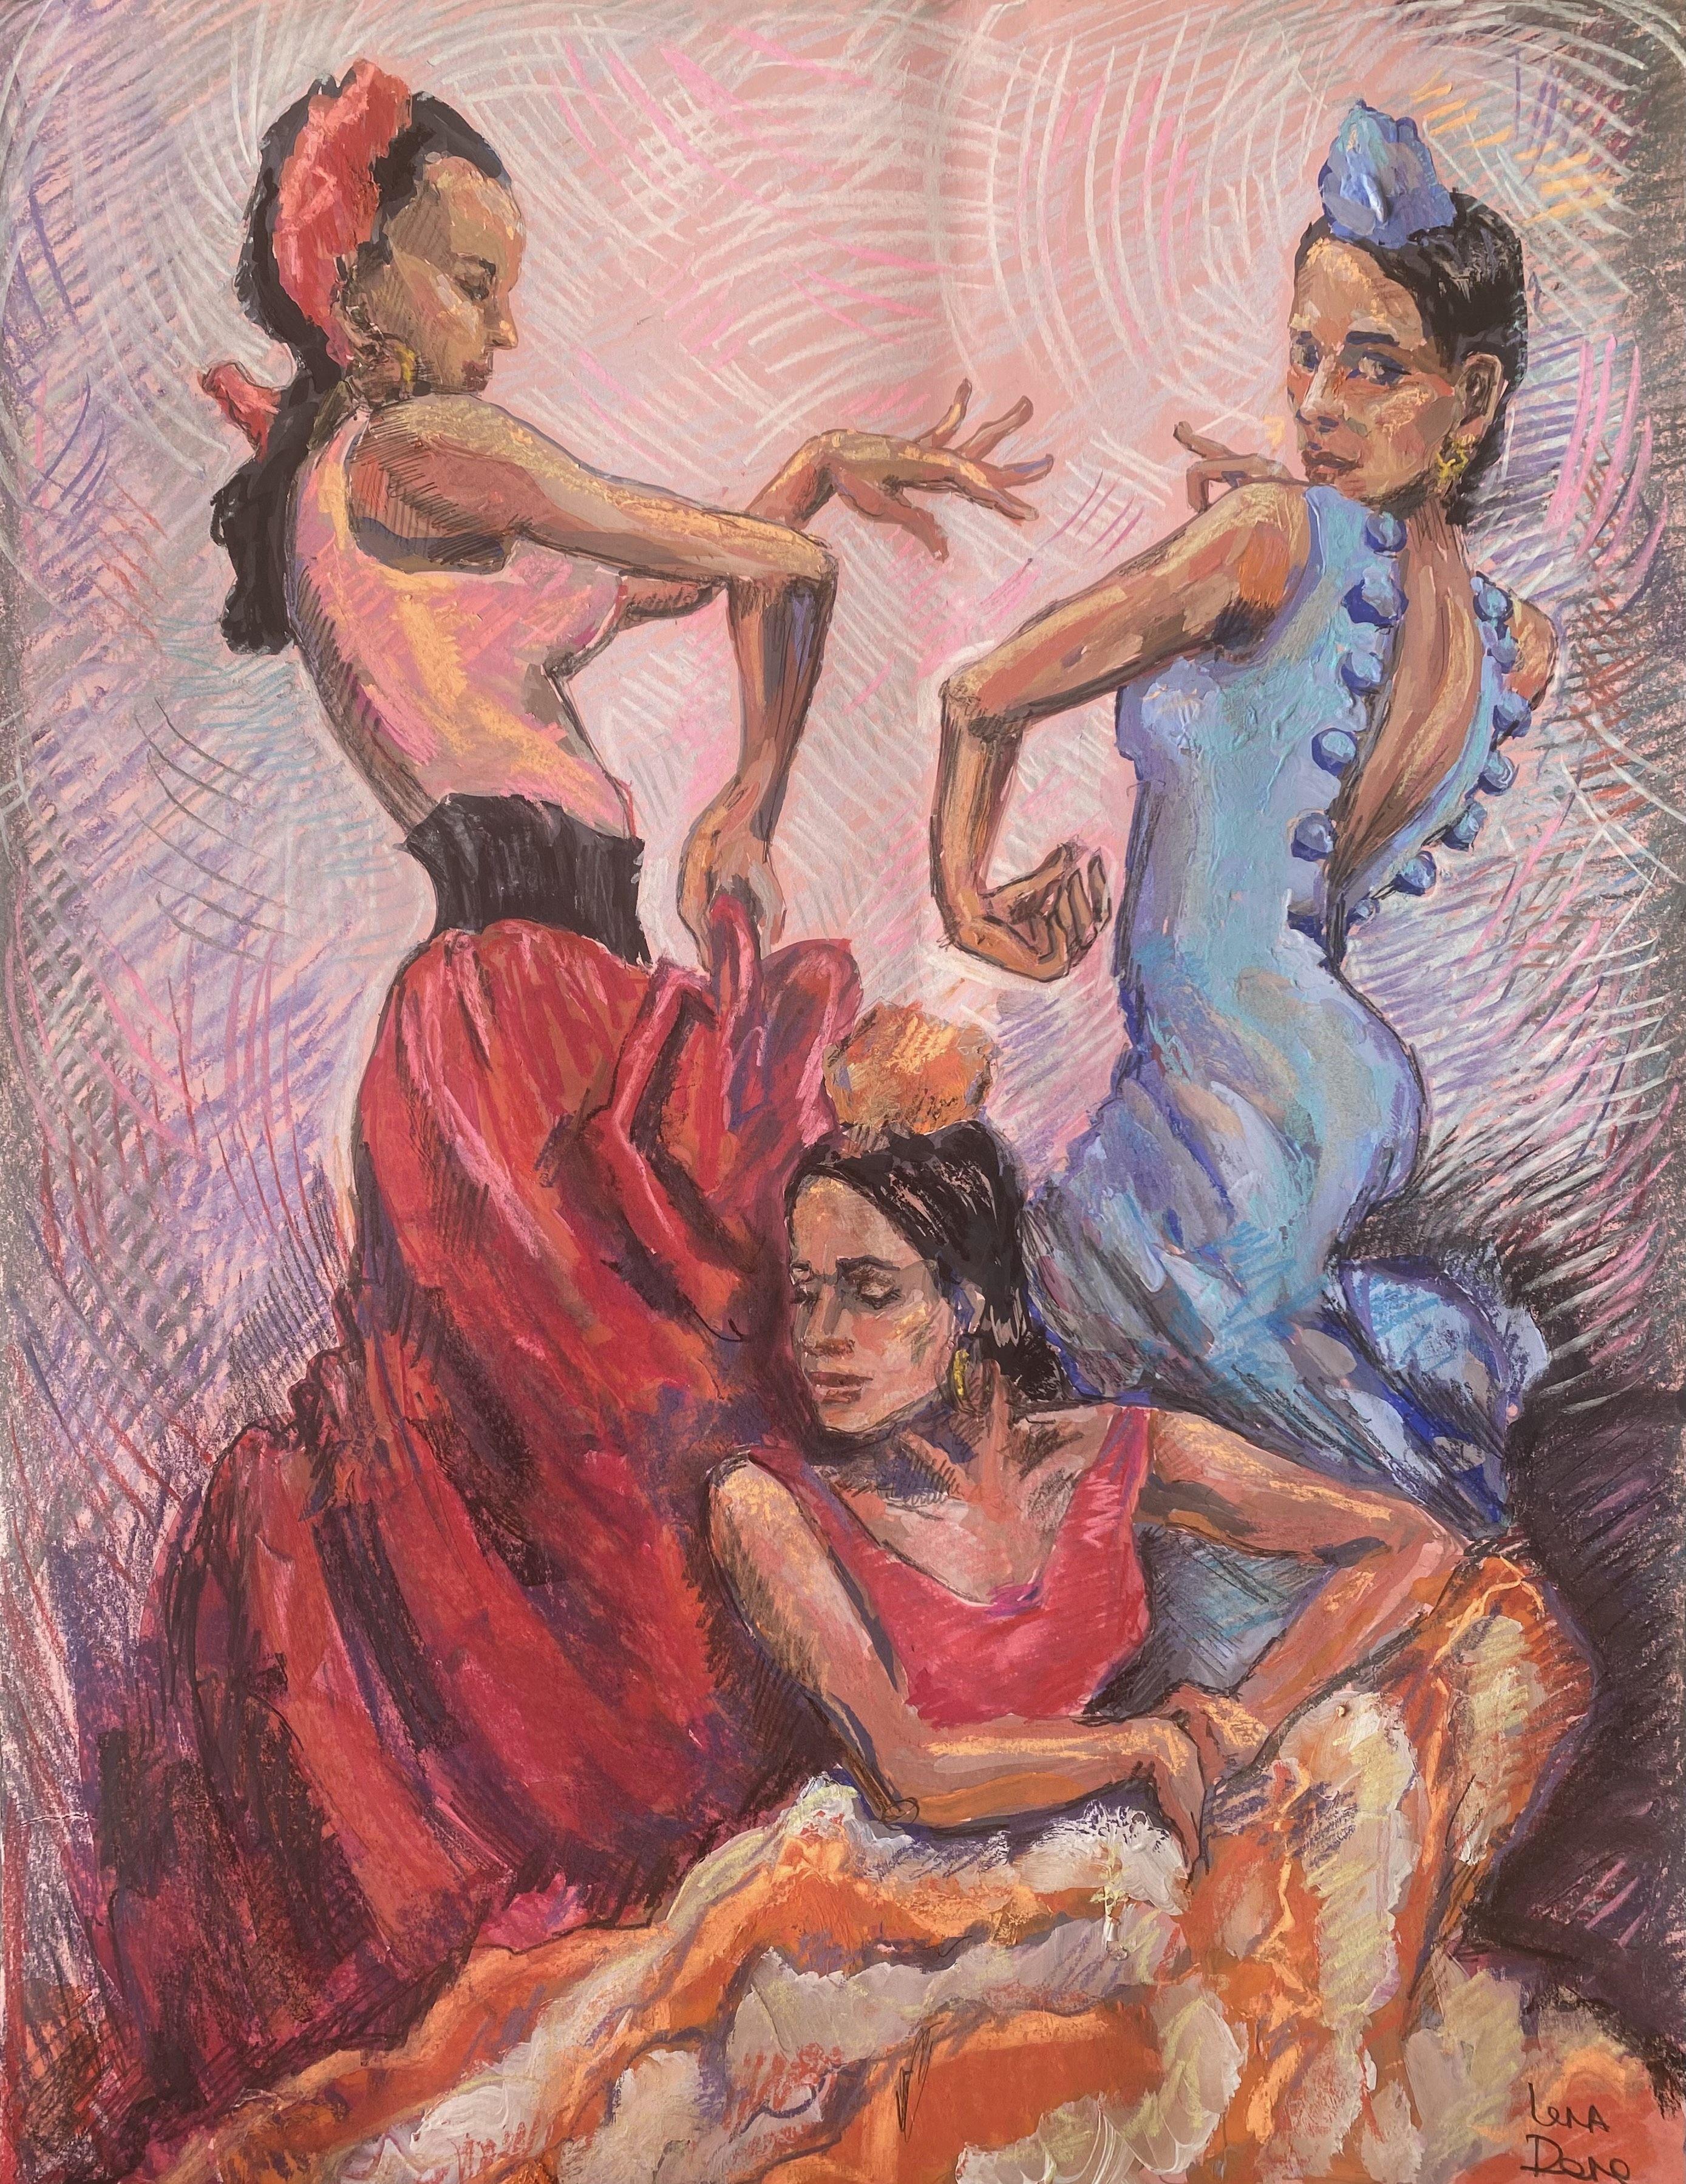 Silhouettes. 3 flamenco girls, Drawing, Pastels on Paper - Art by Elena Done